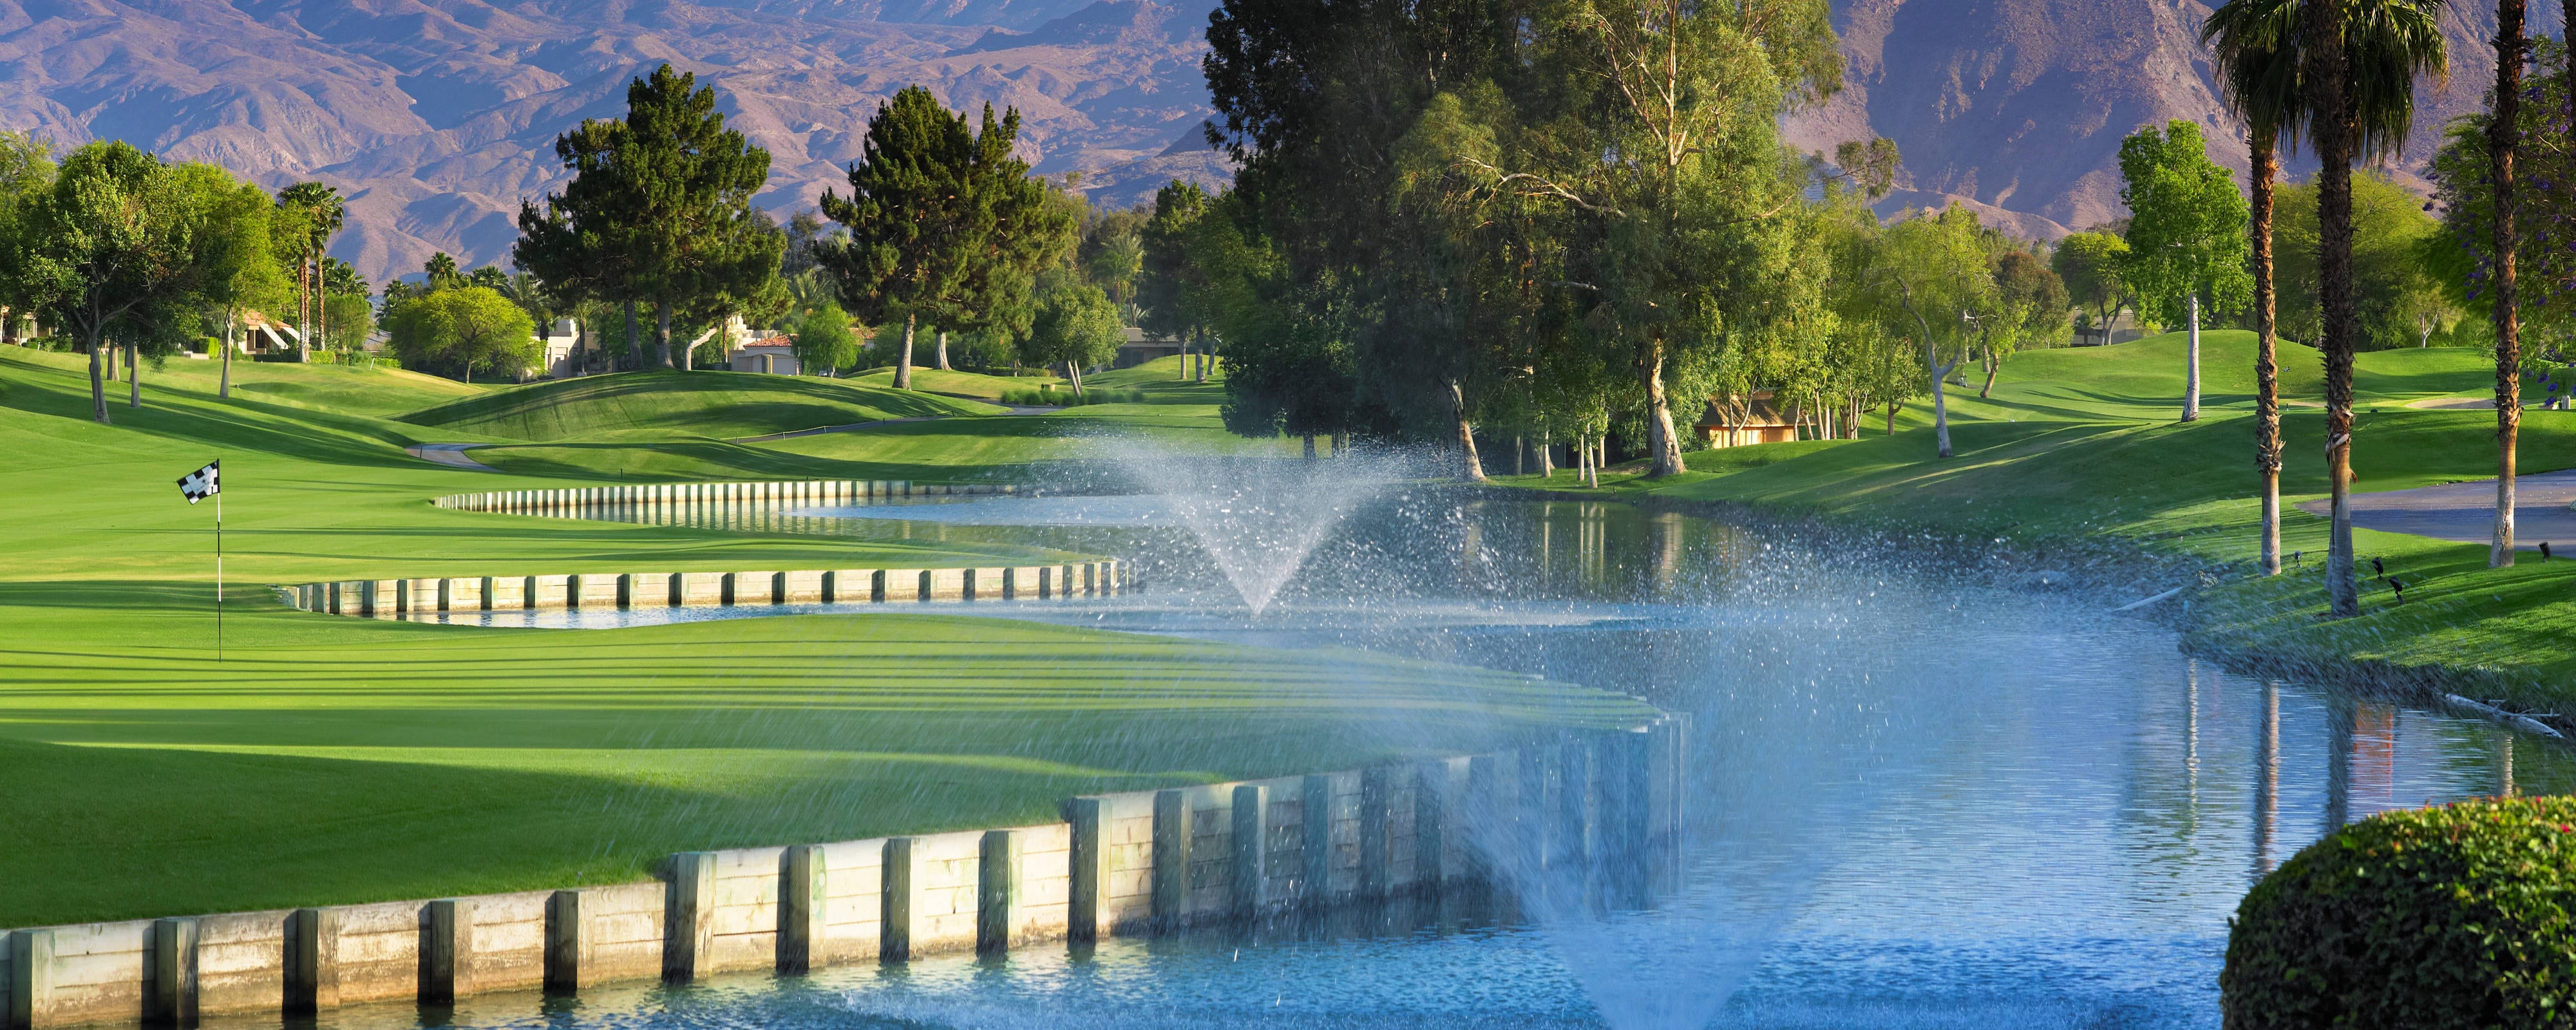 Palm Springs, CA Resort and Hotel | The Westin Mission Hills Golf